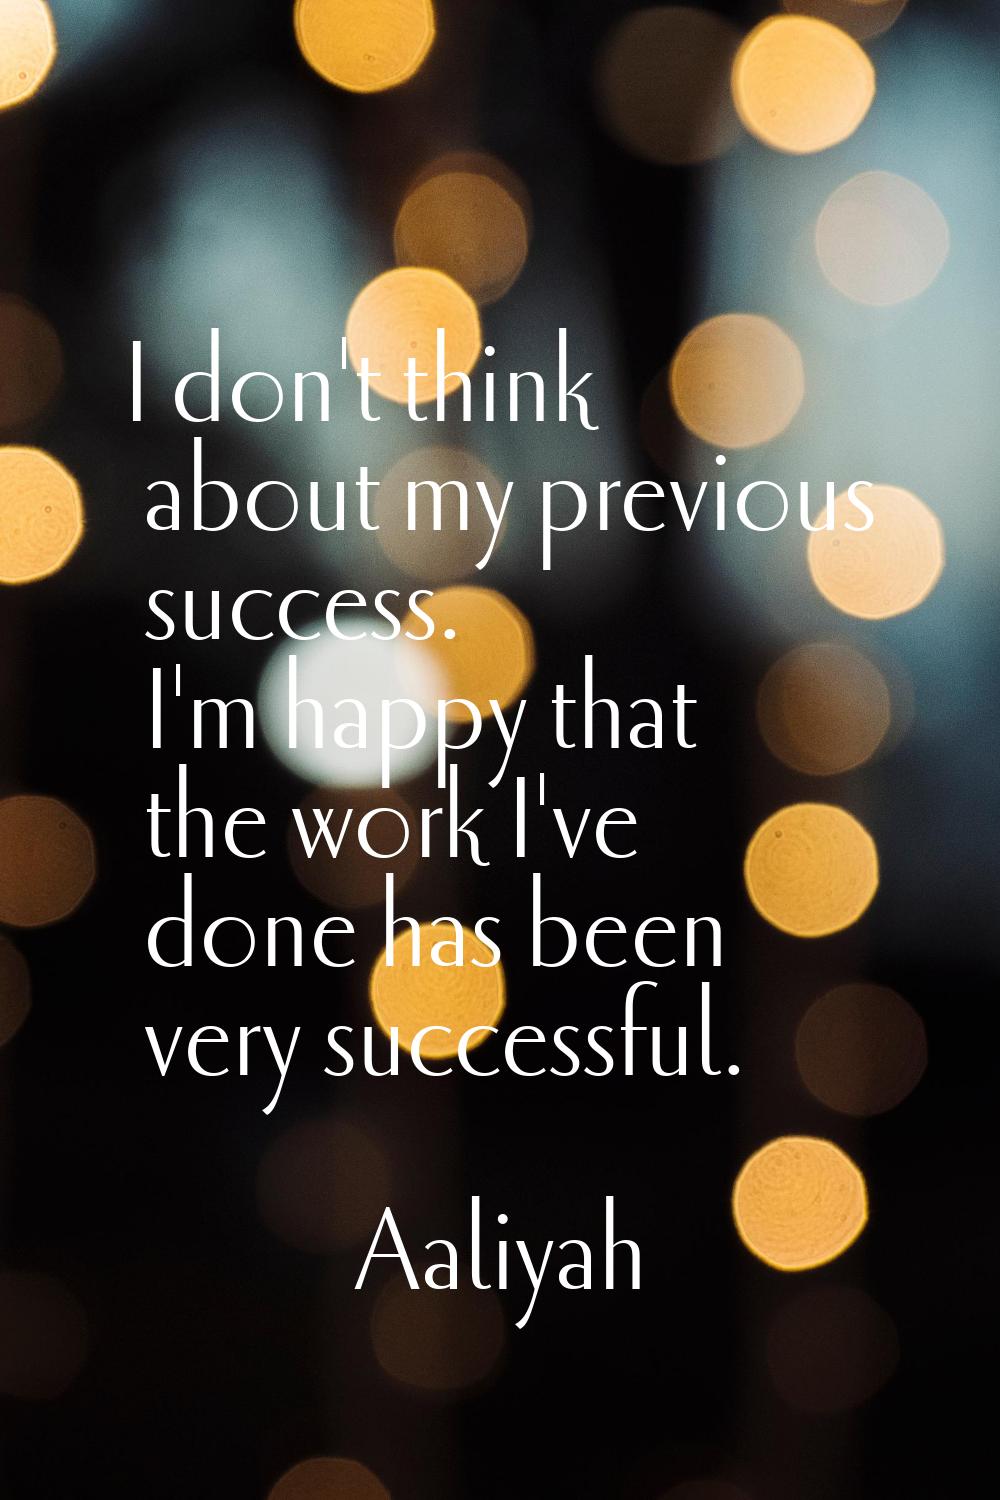 I don't think about my previous success. I'm happy that the work I've done has been very successful